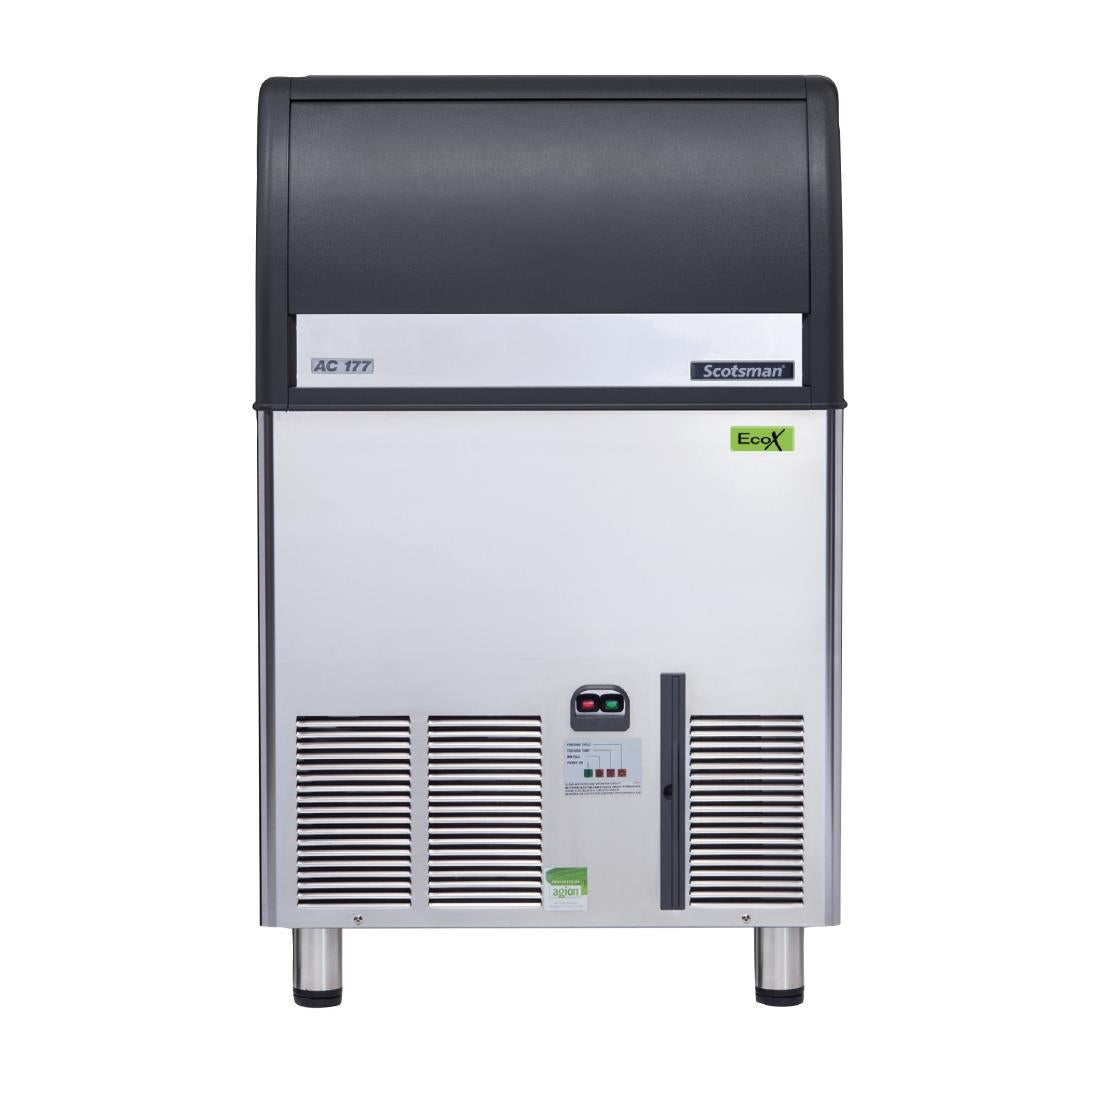 HR285 Scotsman Self Contained Ice Cuber AC177 84kg Output